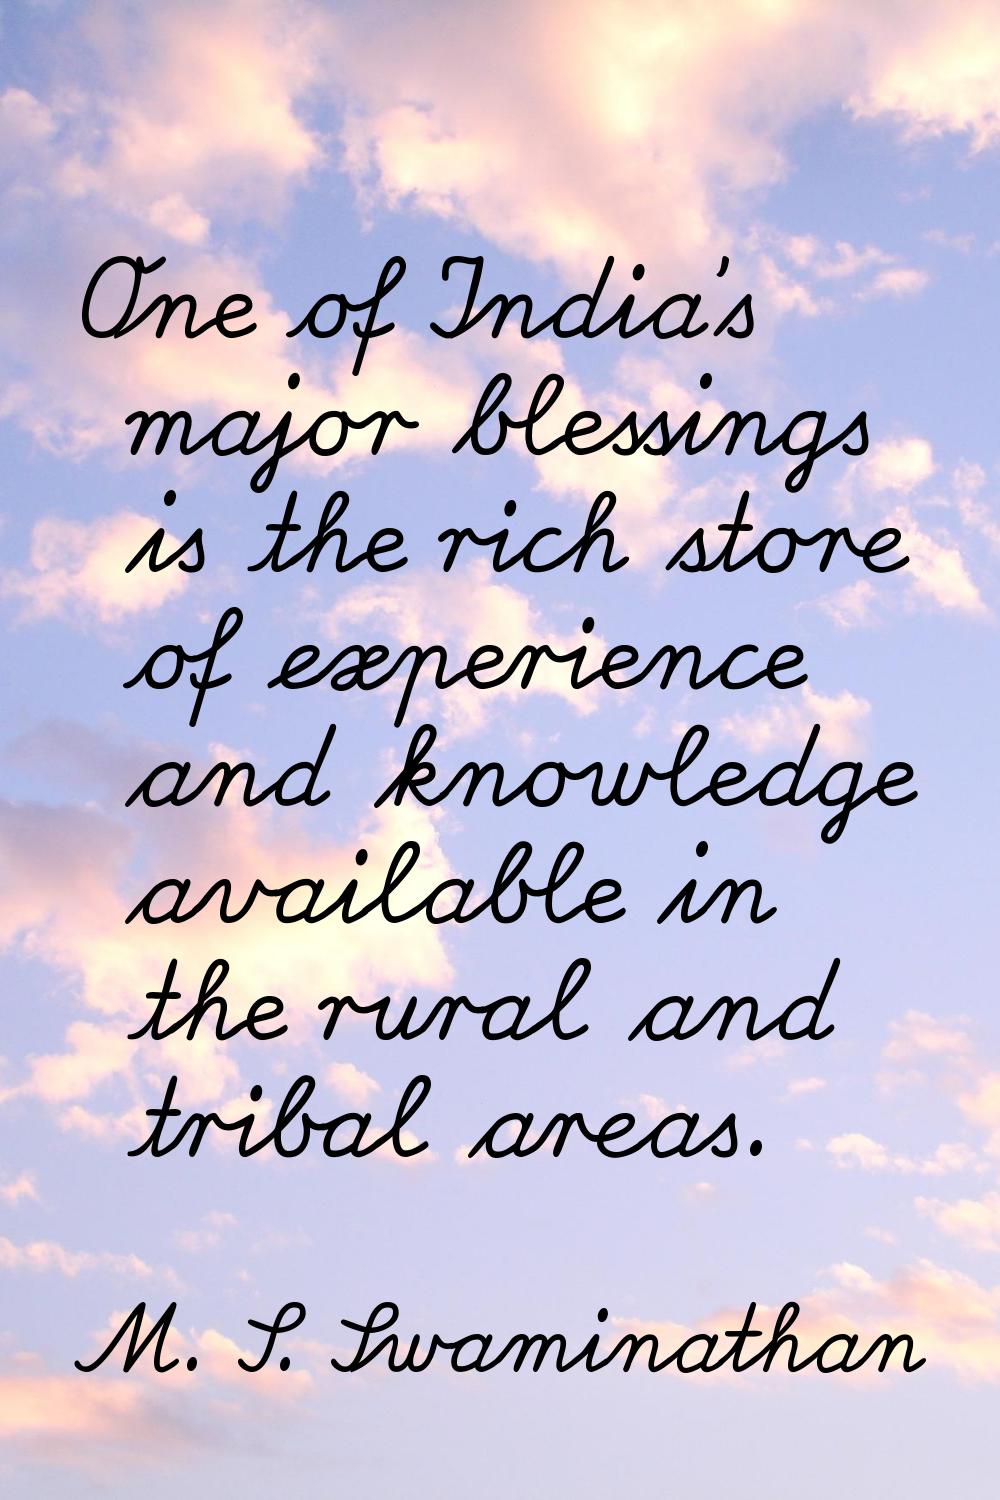 One of India's major blessings is the rich store of experience and knowledge available in the rural